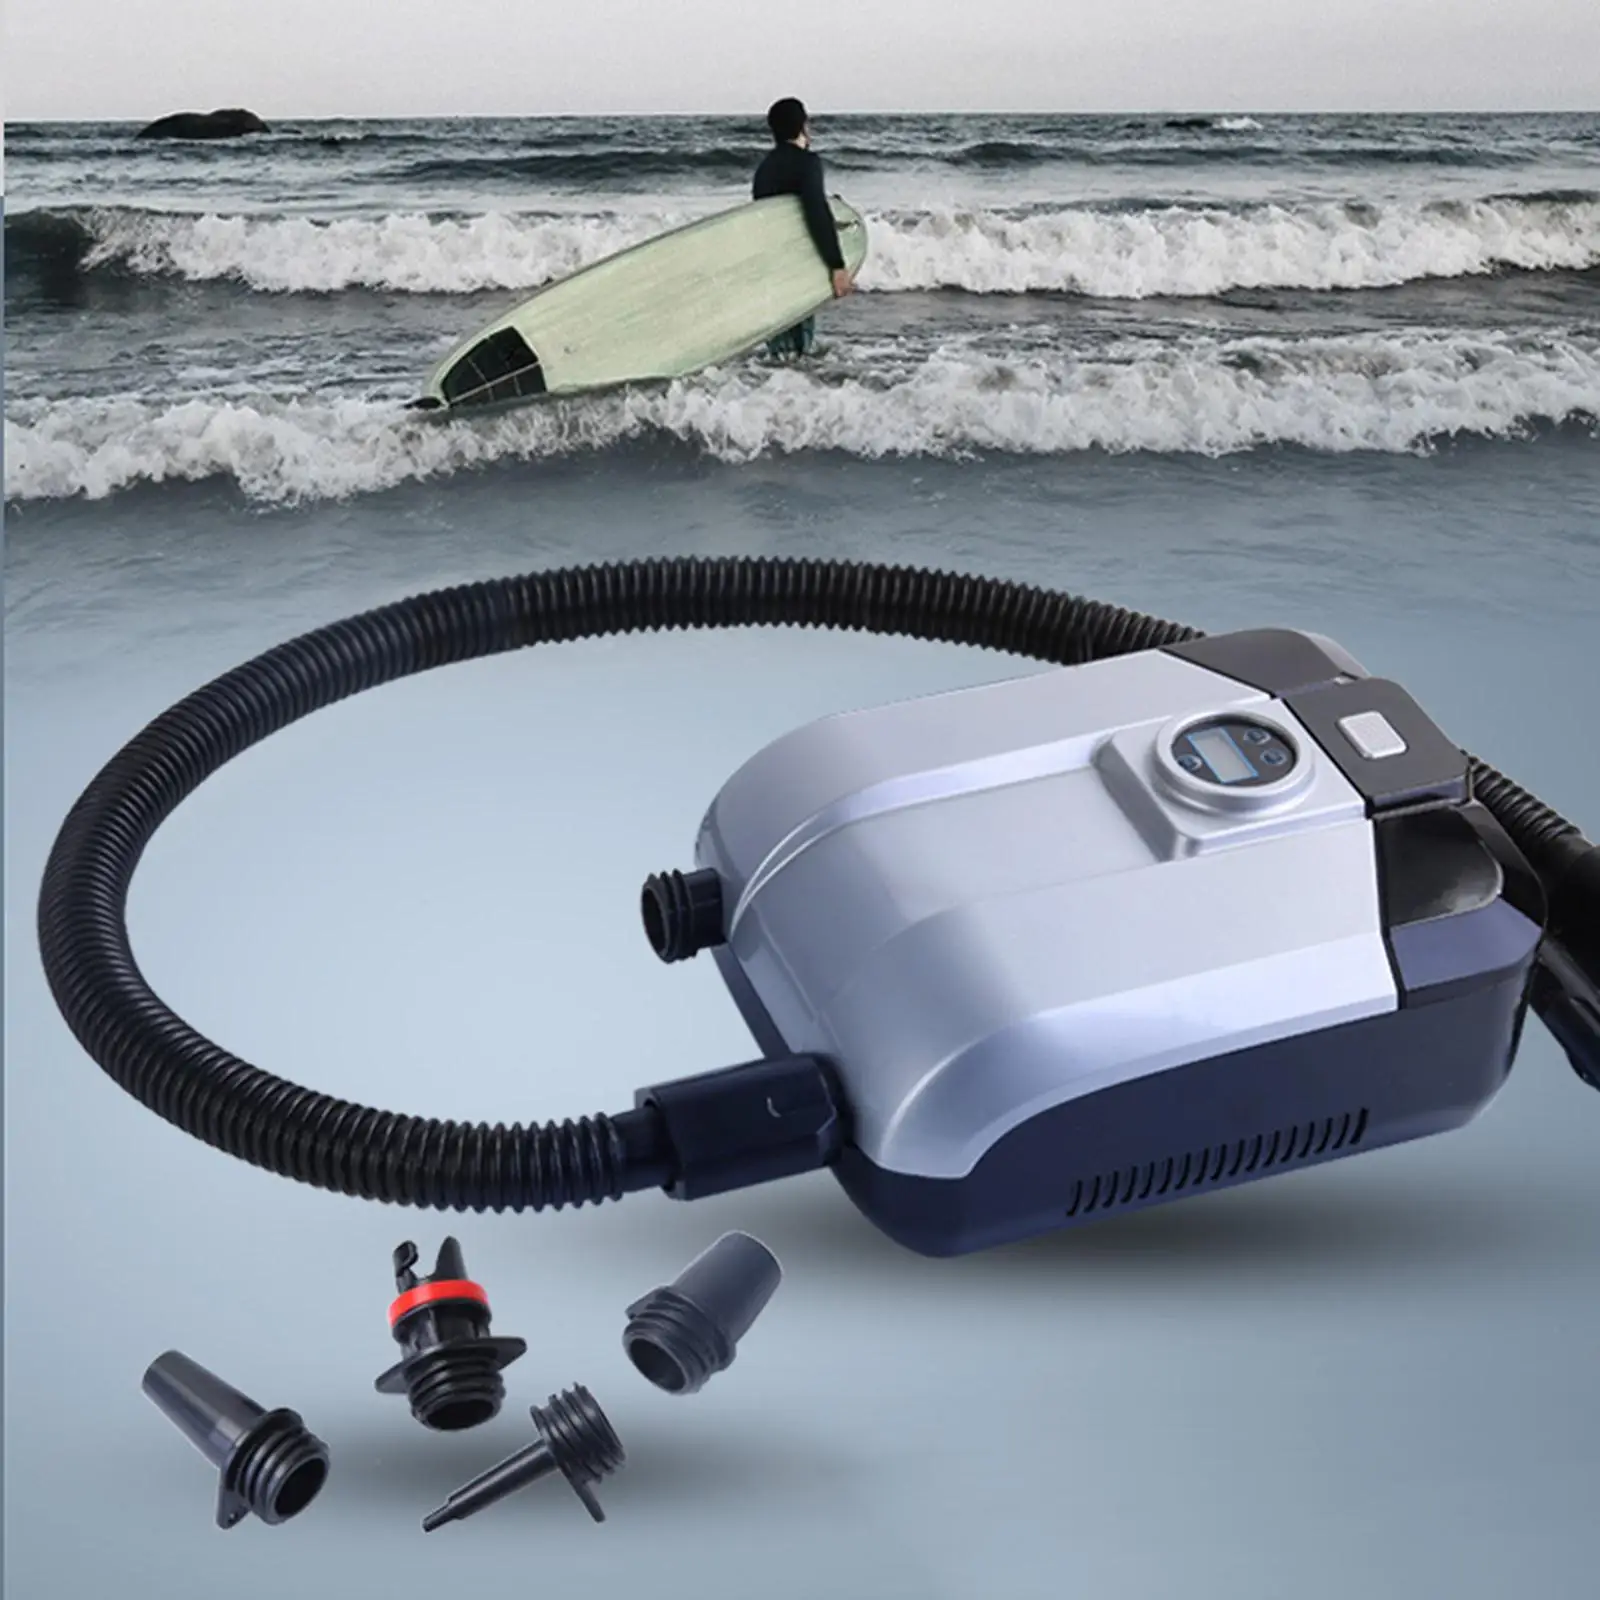 High Pressure Electric Air Pump Rechargeable for Pools Toys